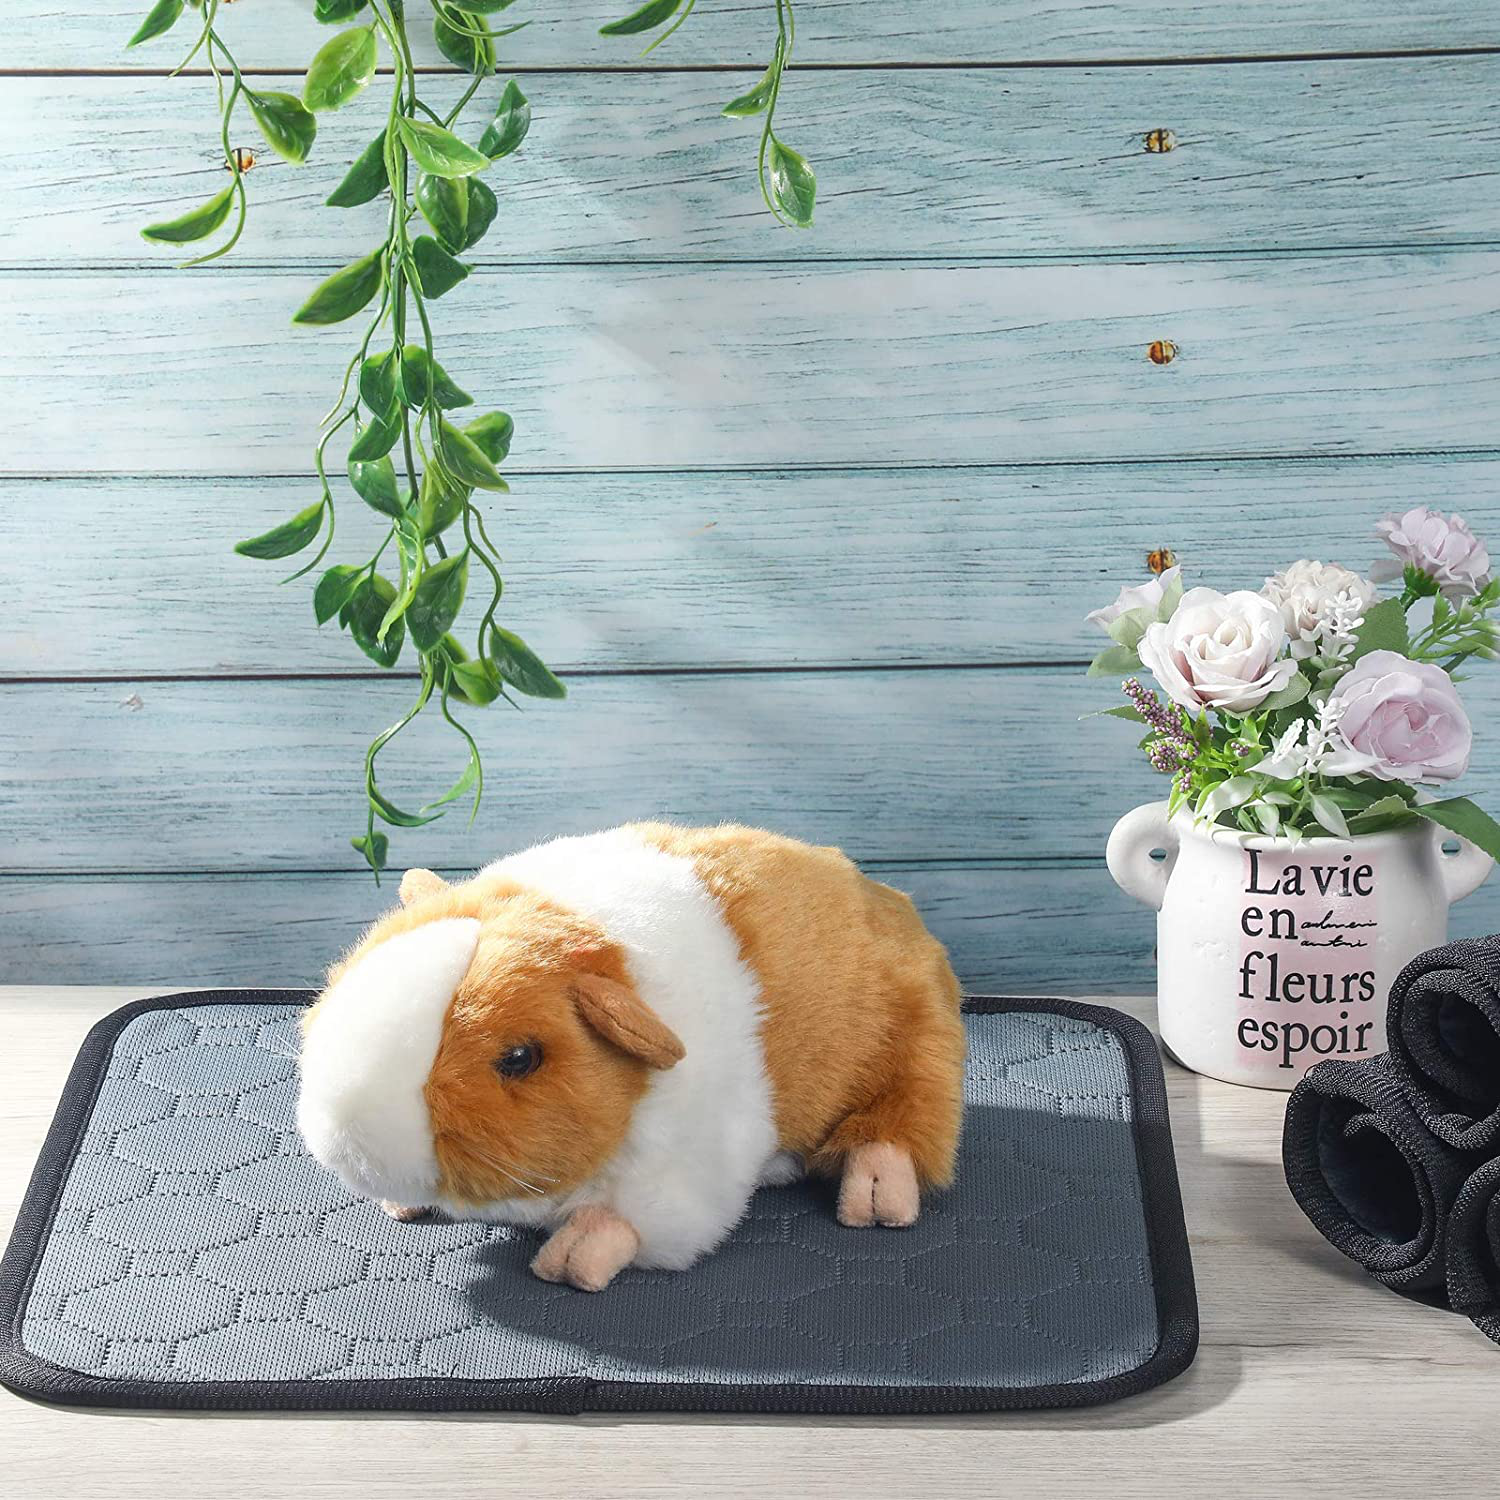 Jetec 5 Pieces Guinea Pig Cage Liners Washable and Reusable Guinea Pig Pee Pads Anti-Slip and Highly Absorbent Guinea Pig Bedding Waterproof Pet Training Pads for Small Rabbit Hamster Rat